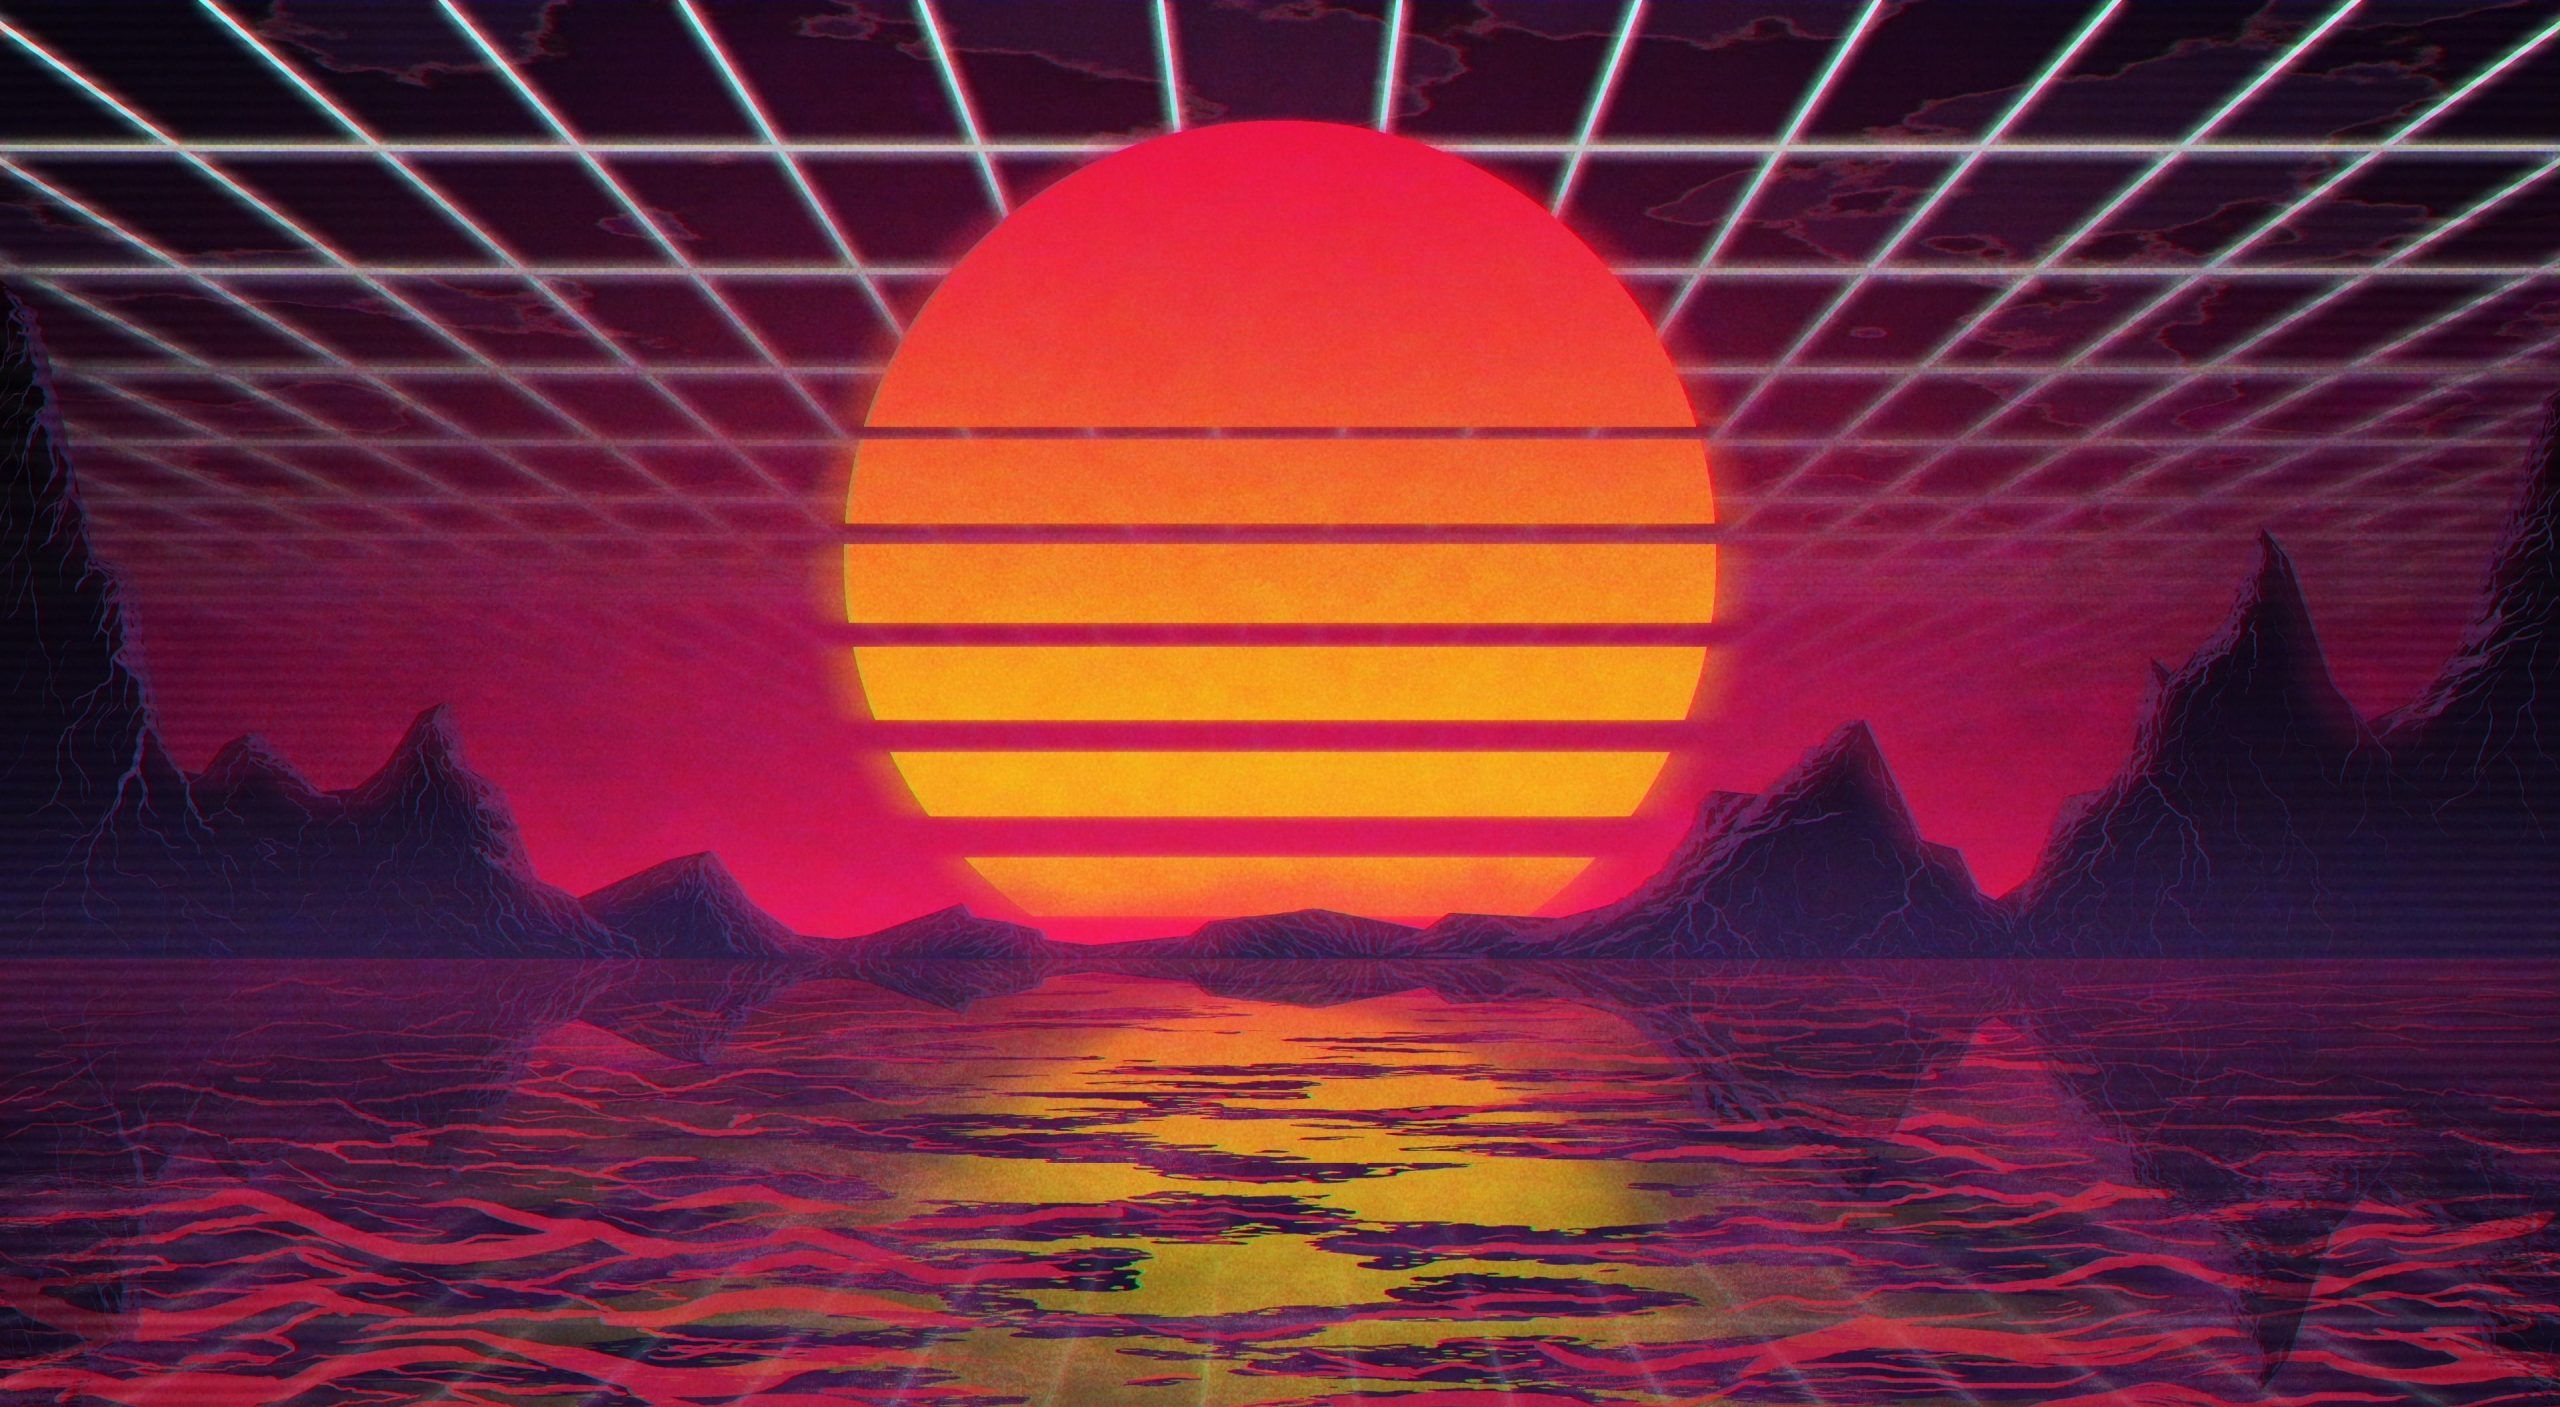 The Sun, Music, Star, Background, 80s Wallpaper, Neon, VHS, 80's, Synth